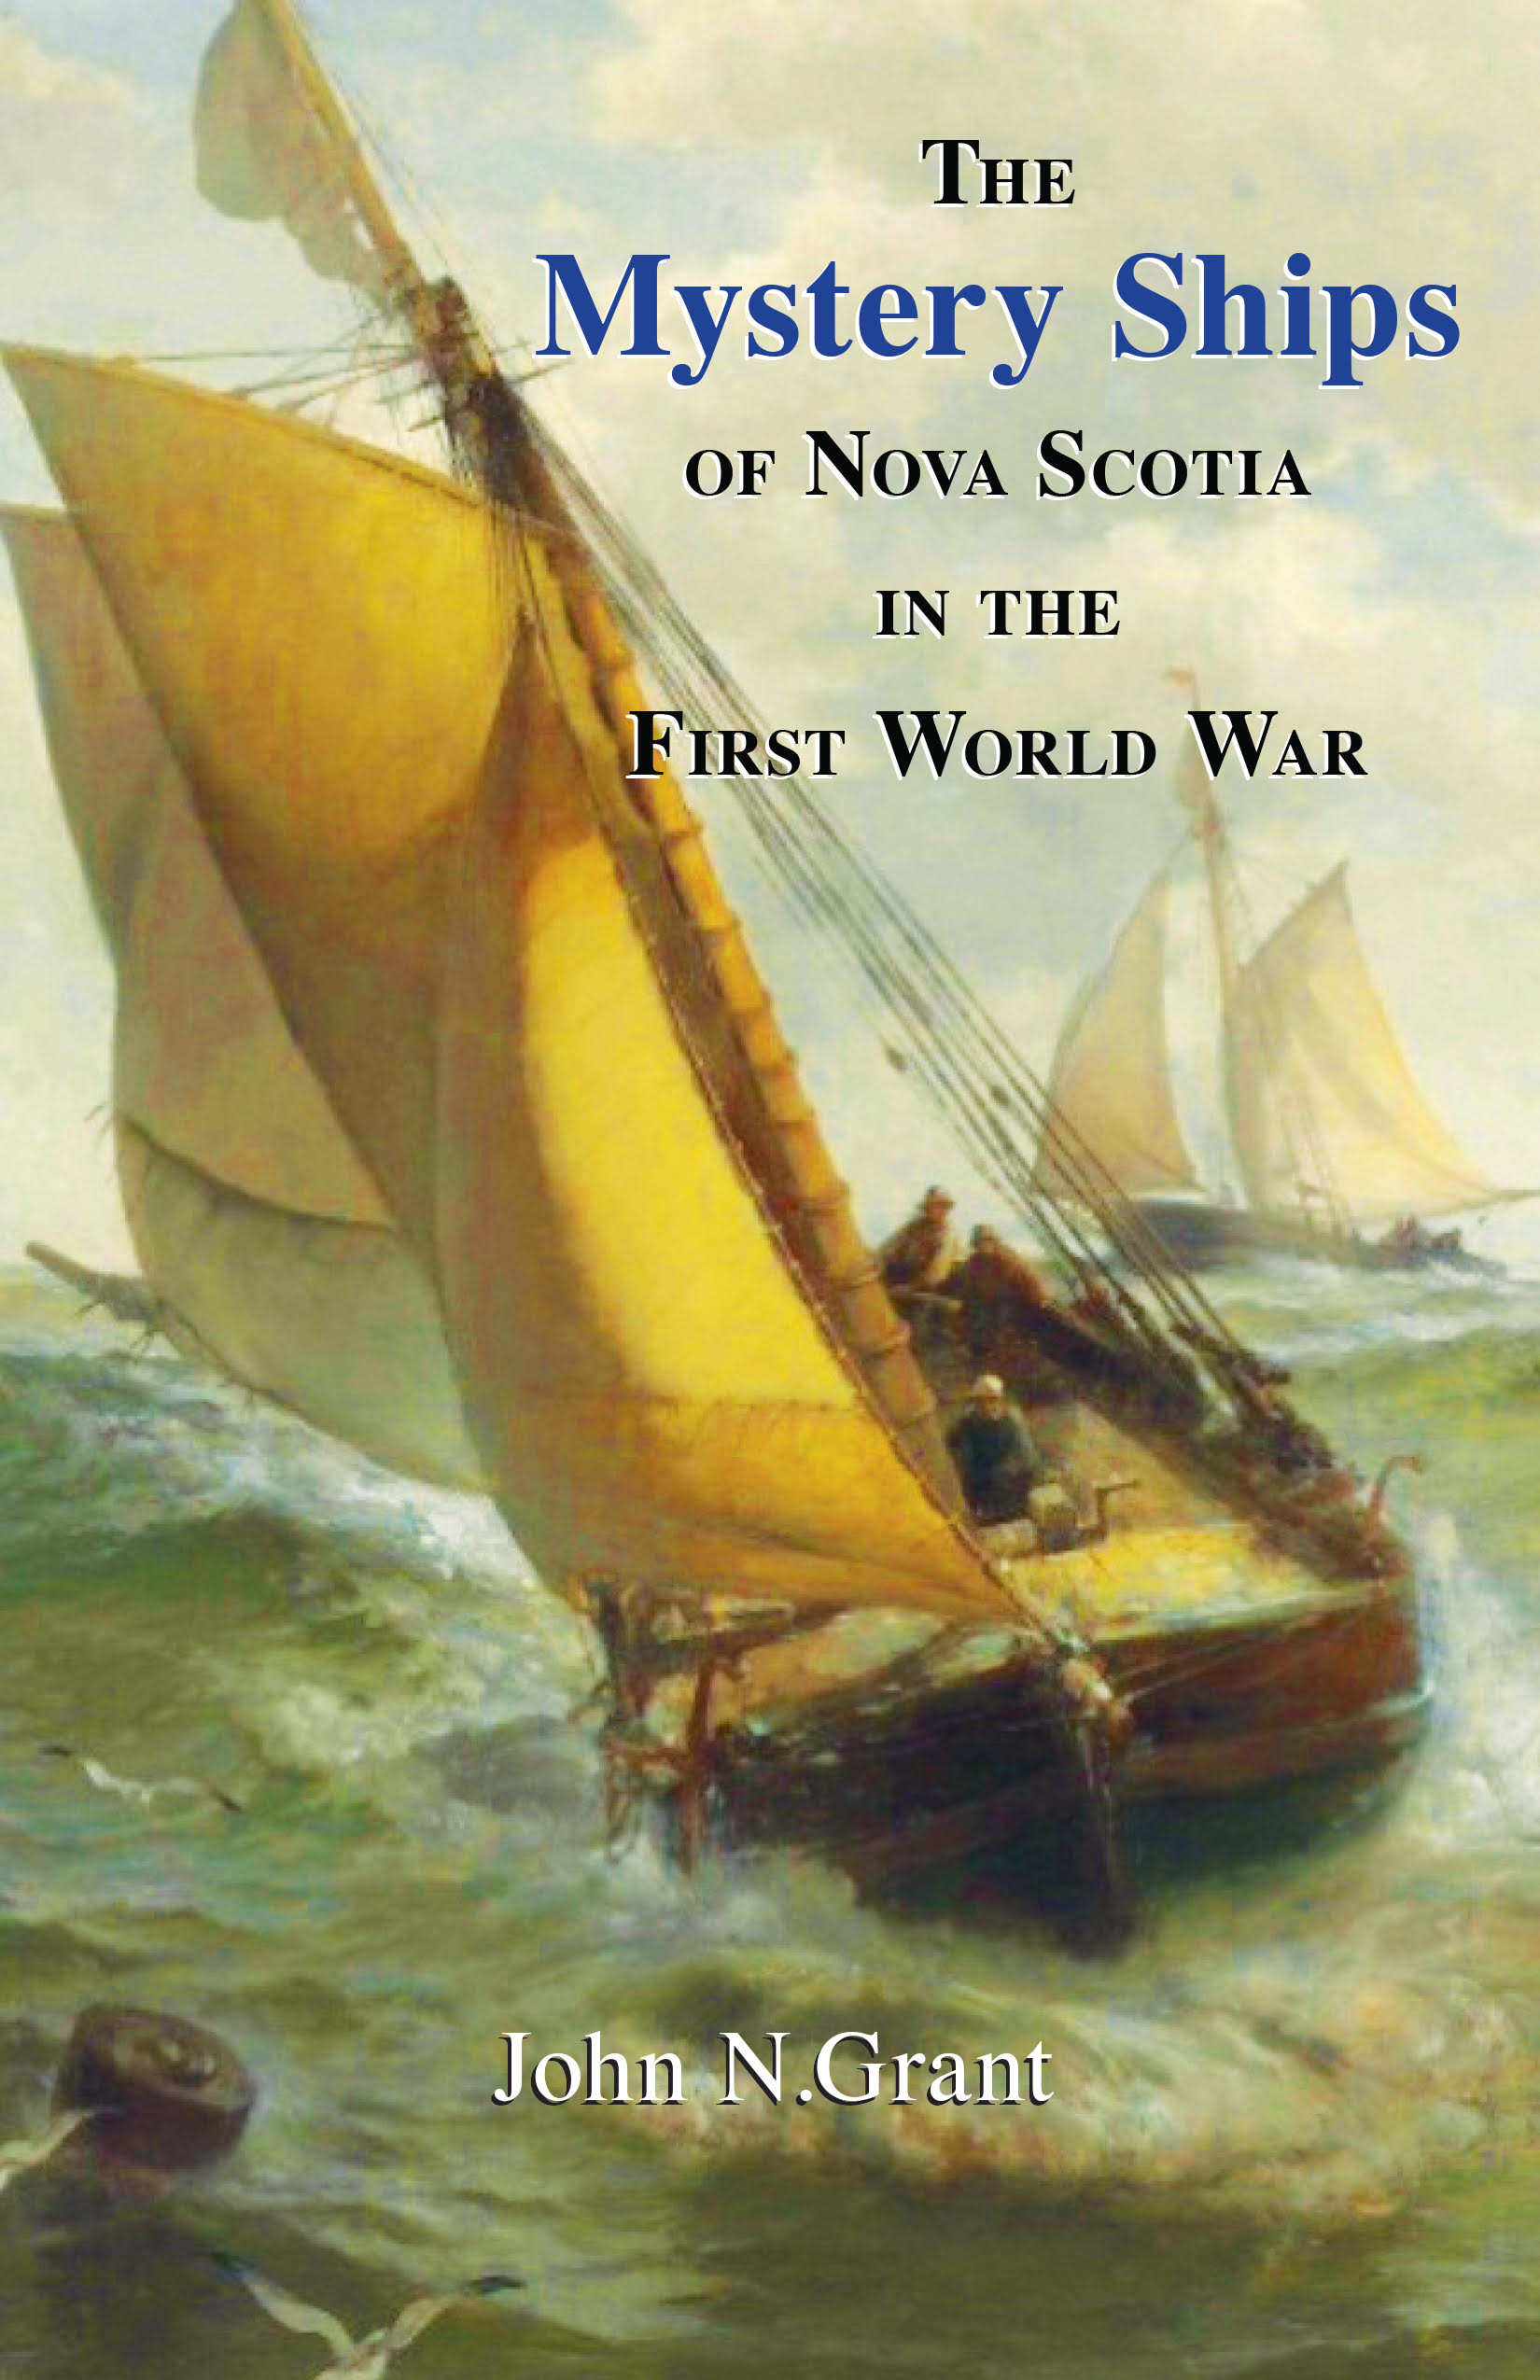 The Mystery Ships of Nova Scotia in the First World War